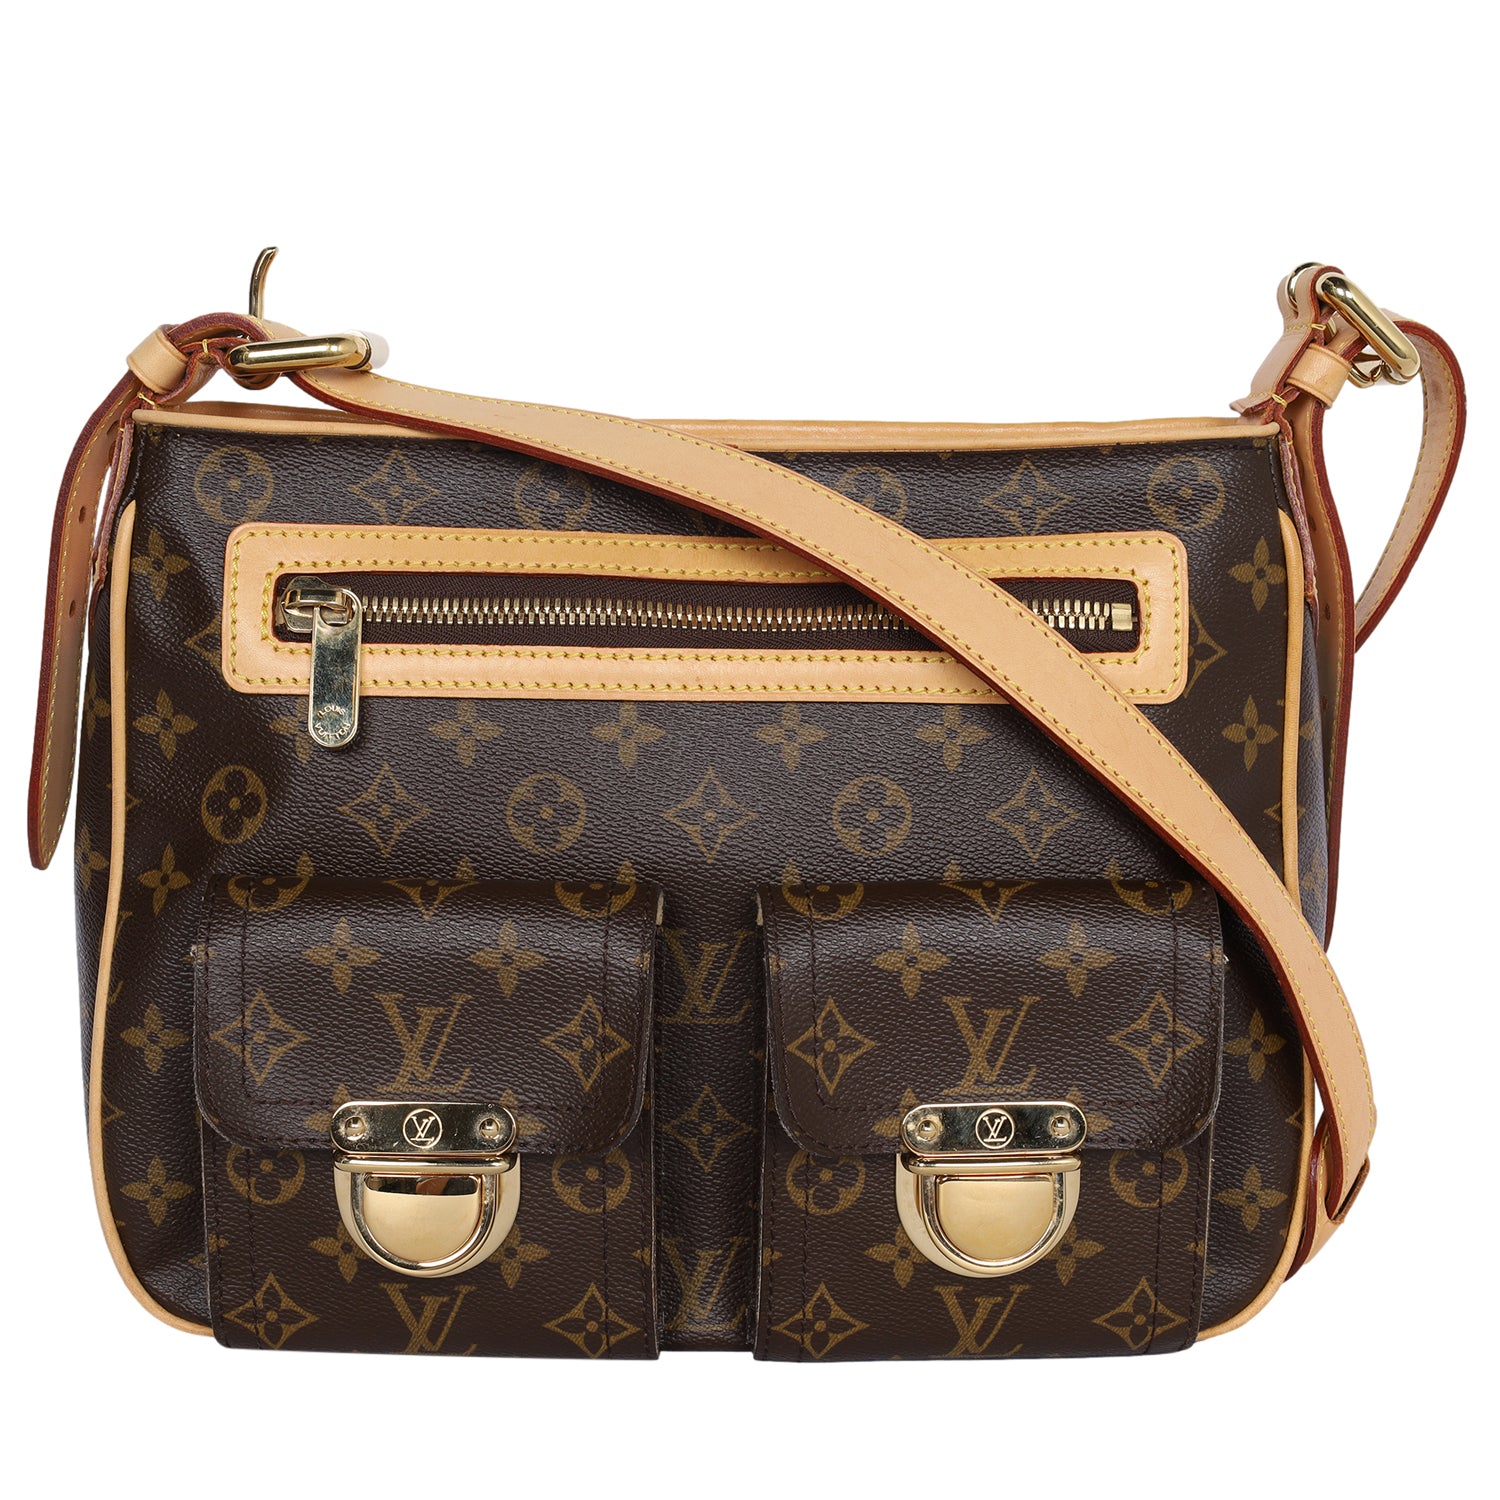 LOUIS VUITTON Brown Monogram Coated Canvas and Vachetta Leather